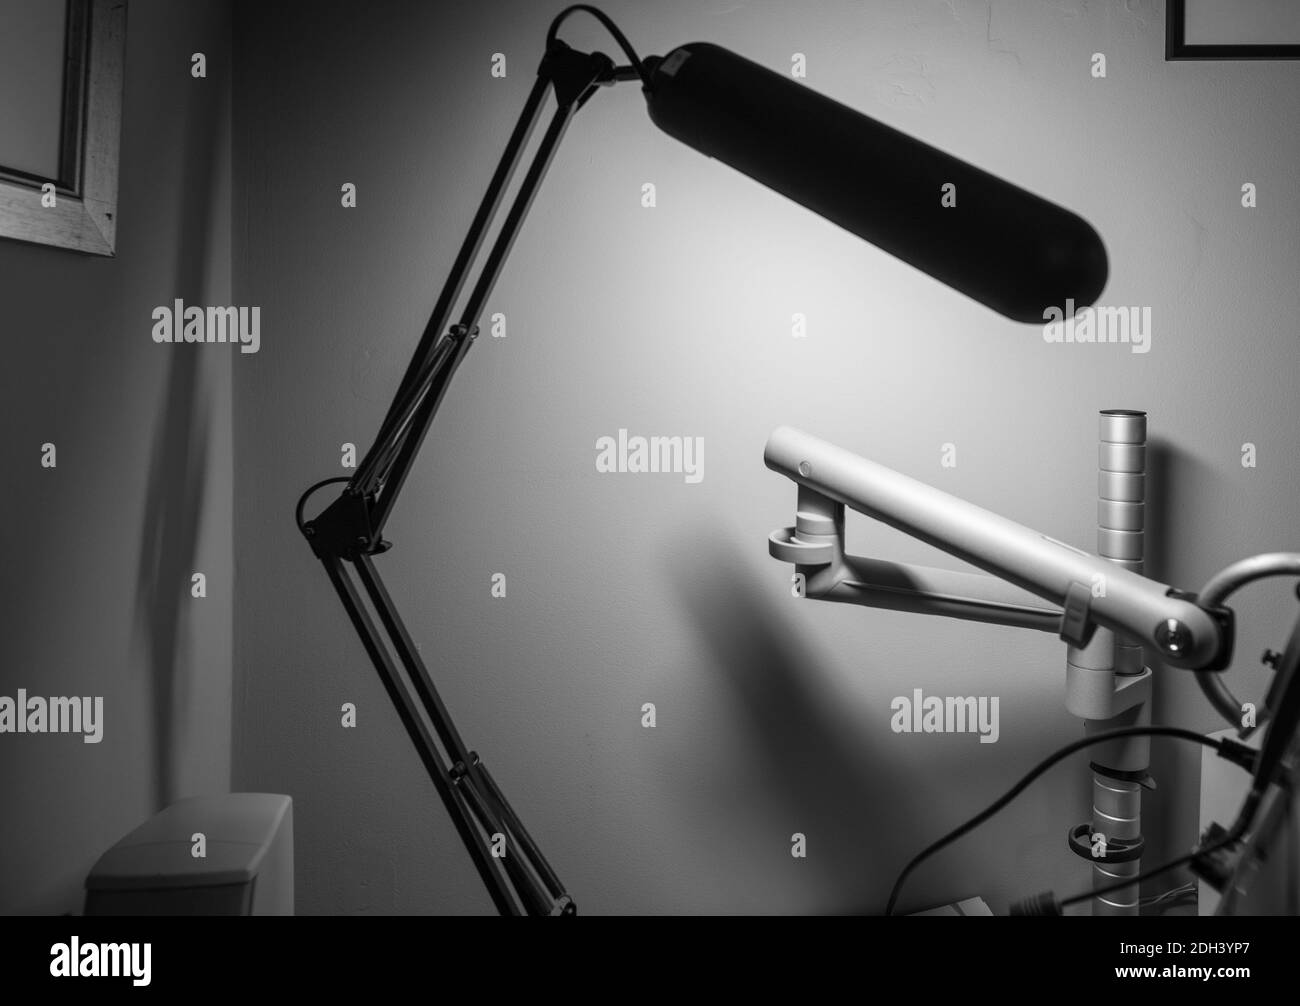 Black and white monochrome image of articulated desk lamp with black arms in foreground blur and articulated monitor stand Stock Photo